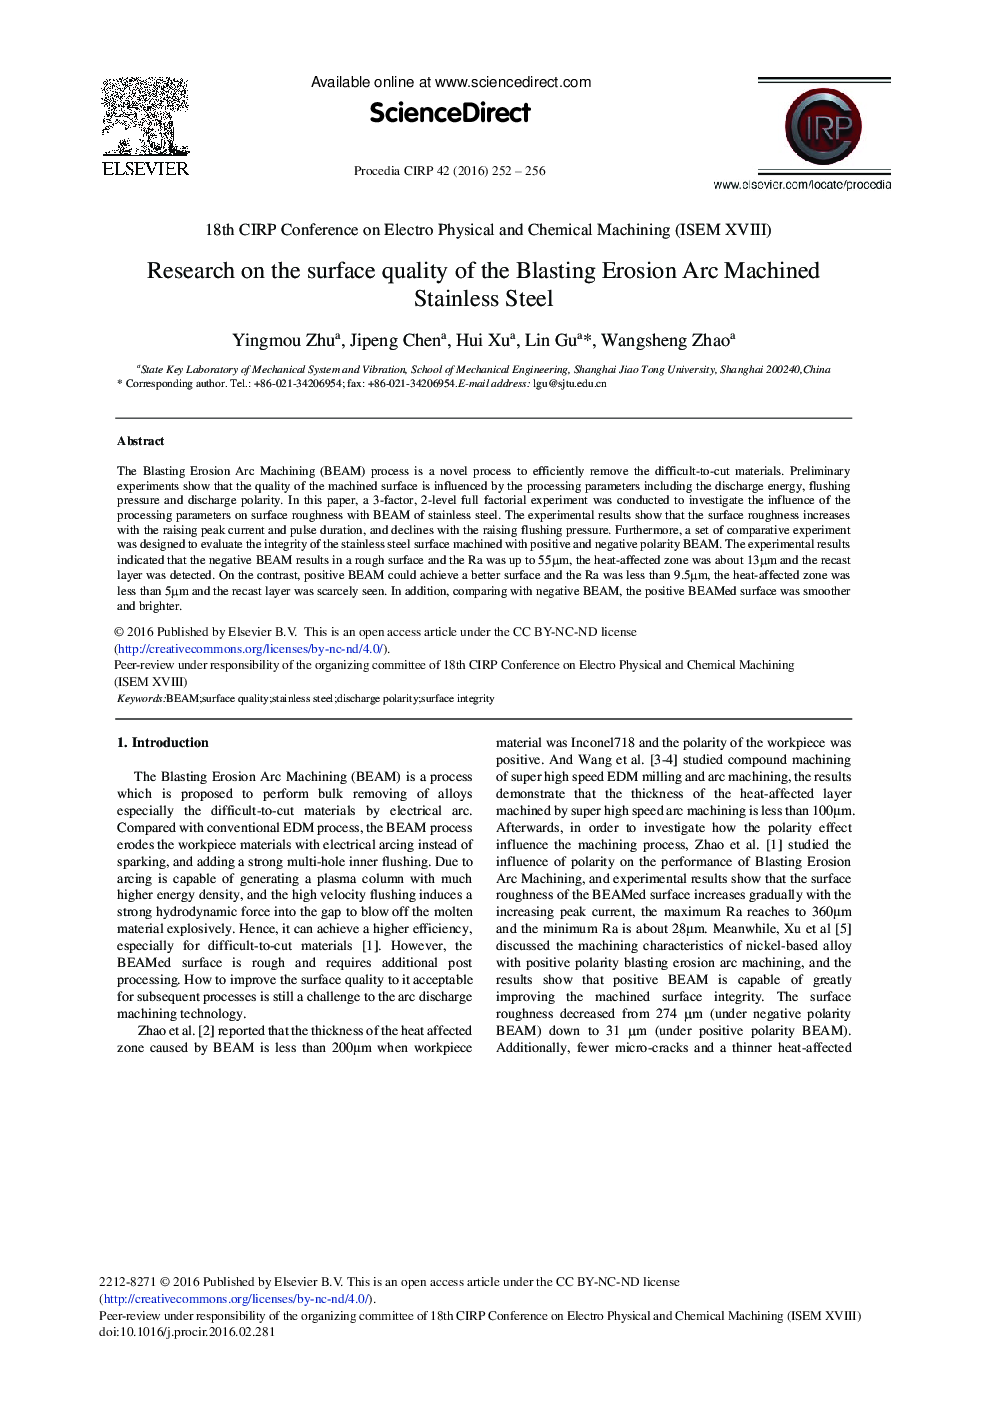 Research on the Surface Quality of the Blasting Erosion Arc Machined Stainless Steel 